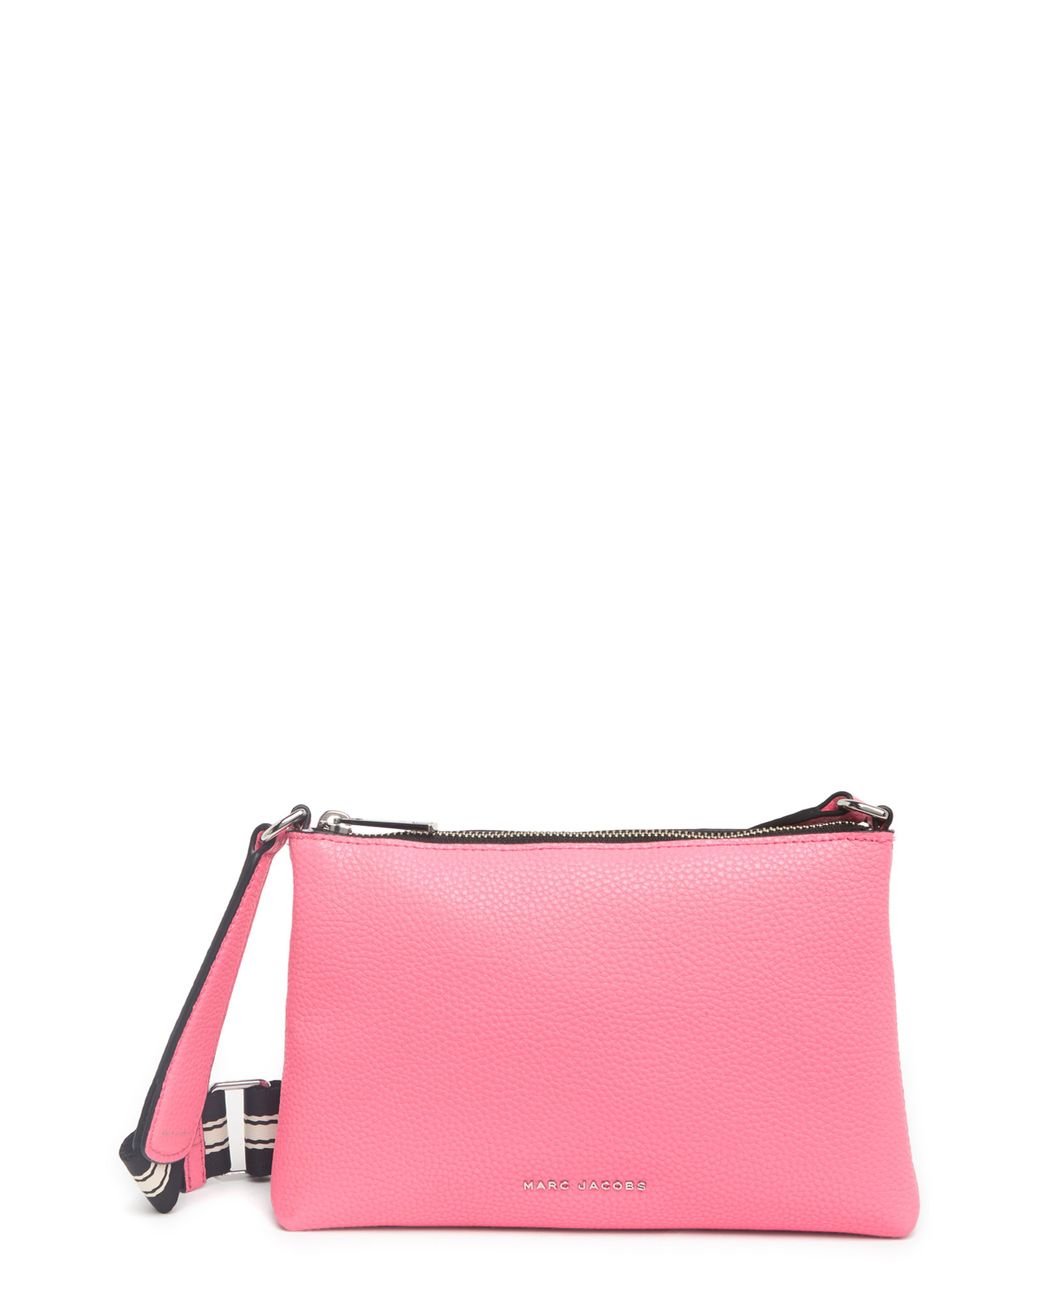 Marc Jacobs The Cosmo Leather Crossbody Bag In Pink Lemonade At ...